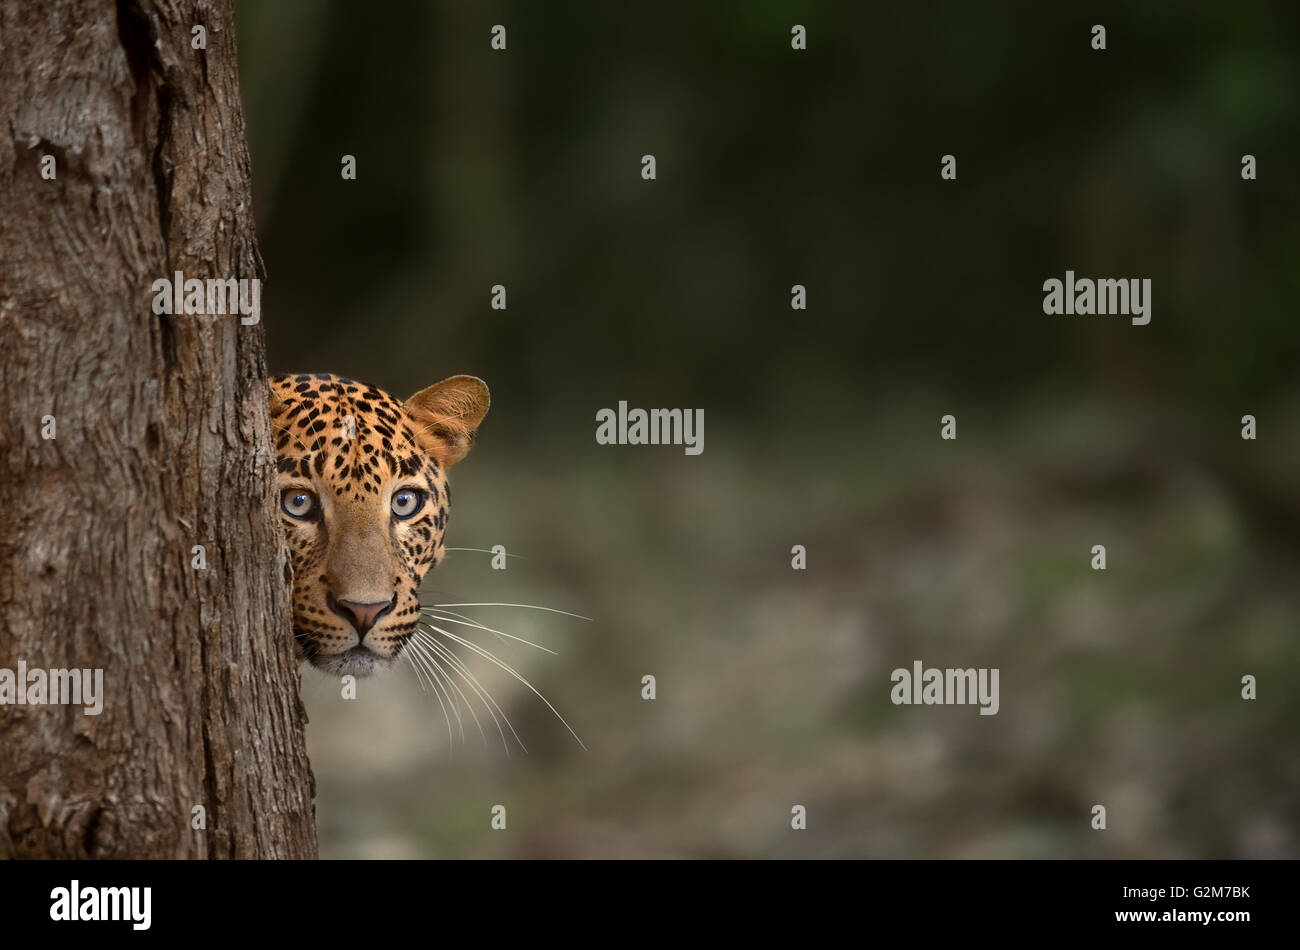 PEEK A BOO !! A composition of a leopard peeping out through a tree ! Stock Photo